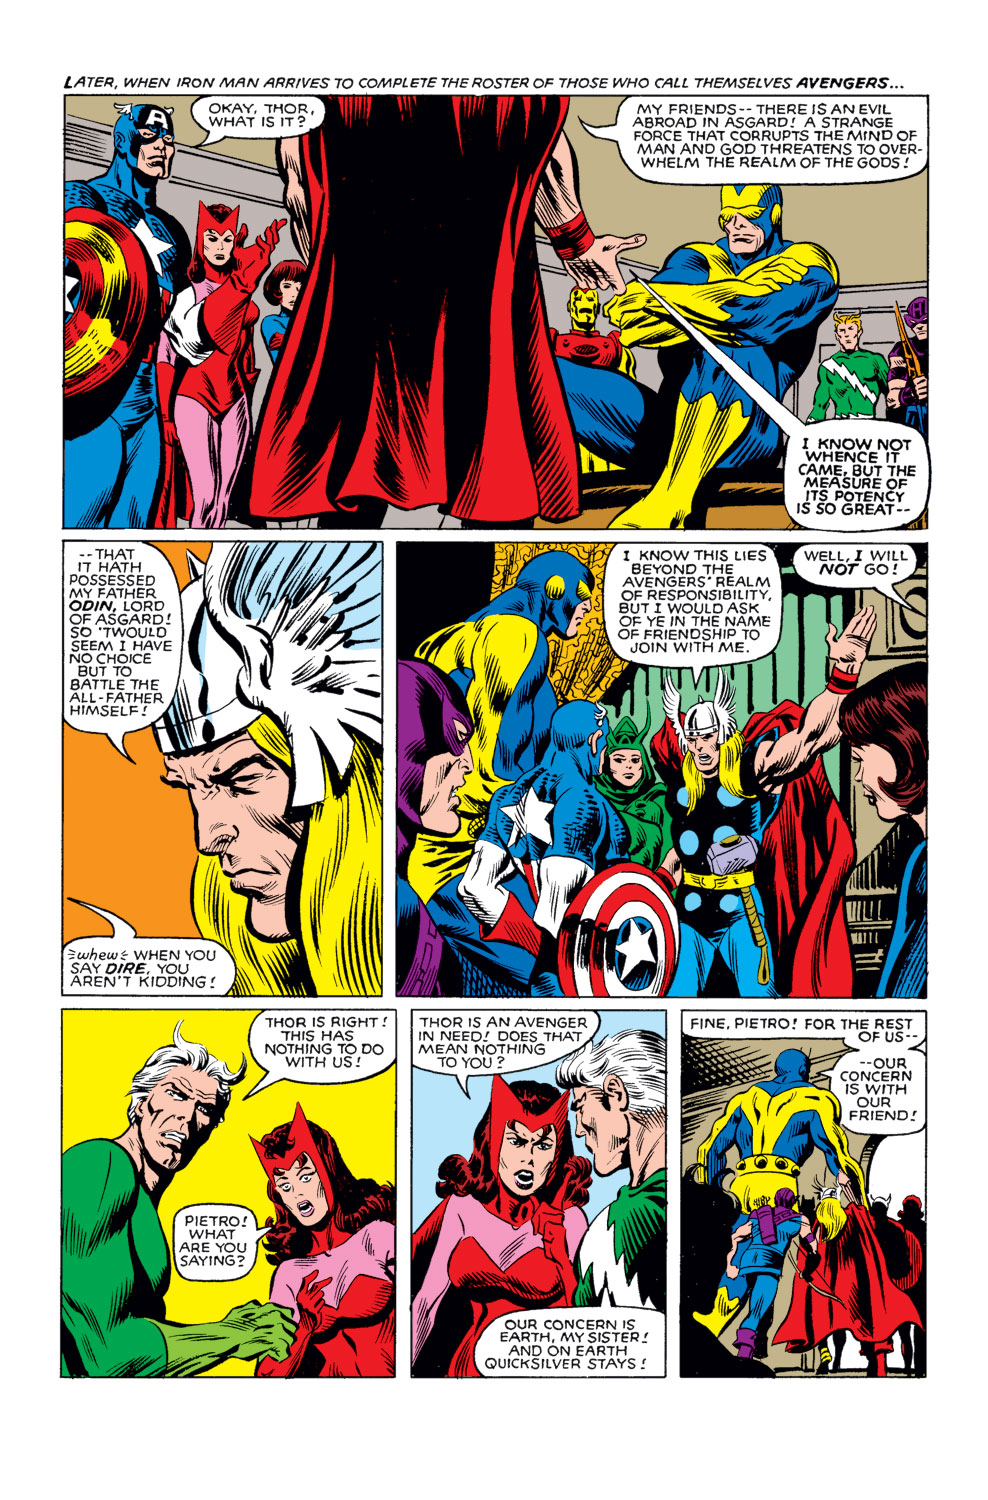 What If? (1977) Issue #25 - Thor and the Avengers battled the gods #25 - English 7